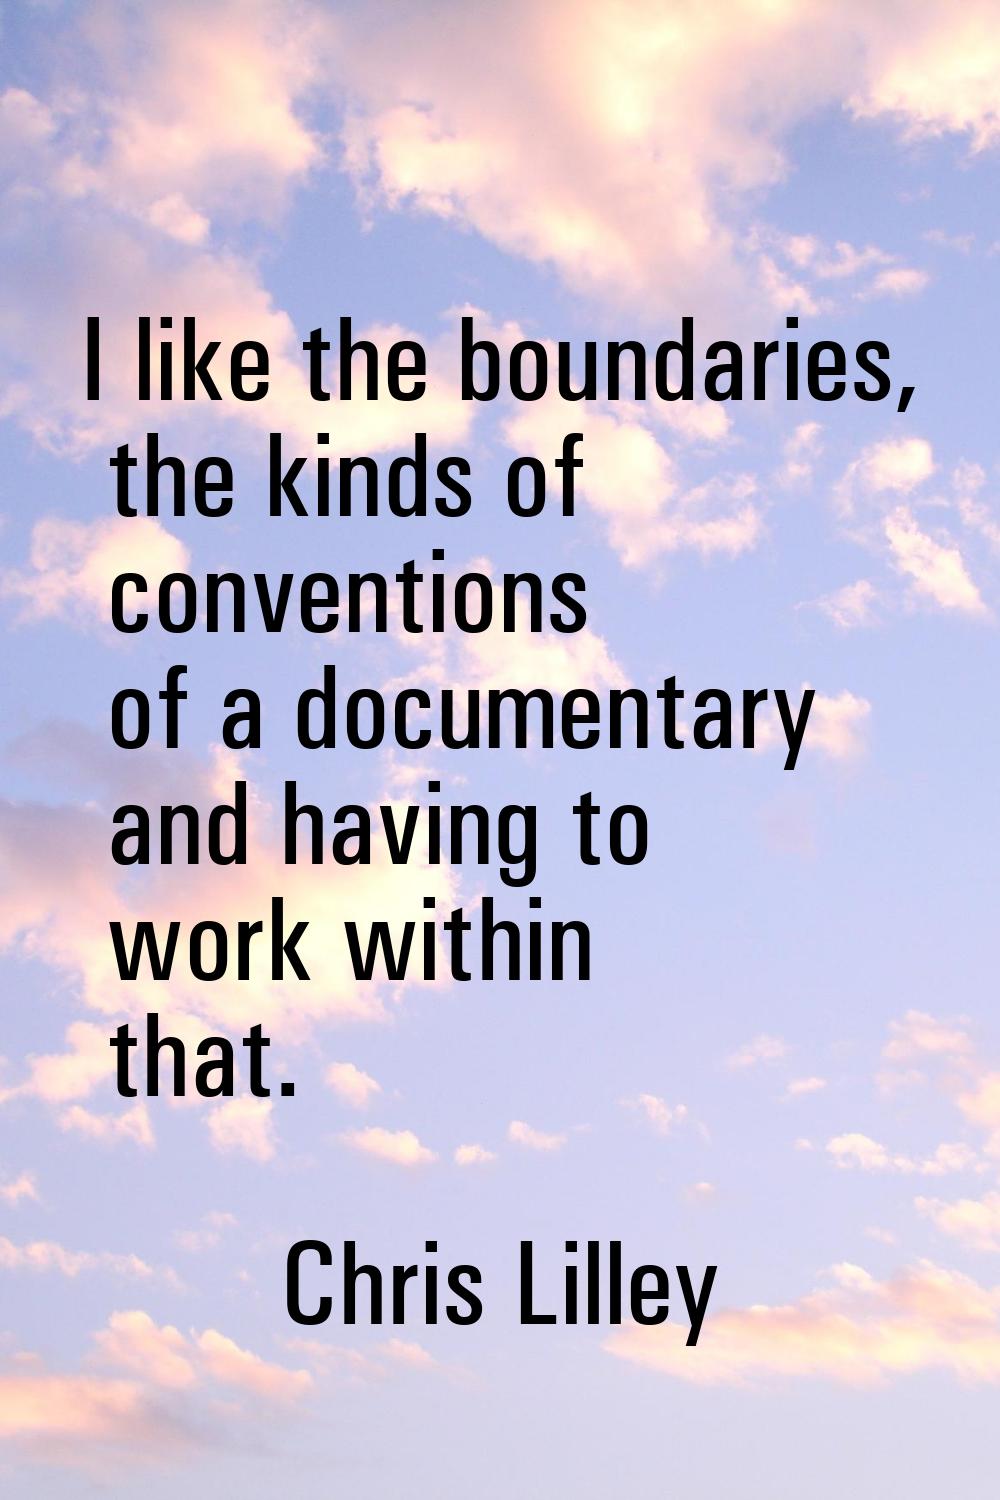 I like the boundaries, the kinds of conventions of a documentary and having to work within that.